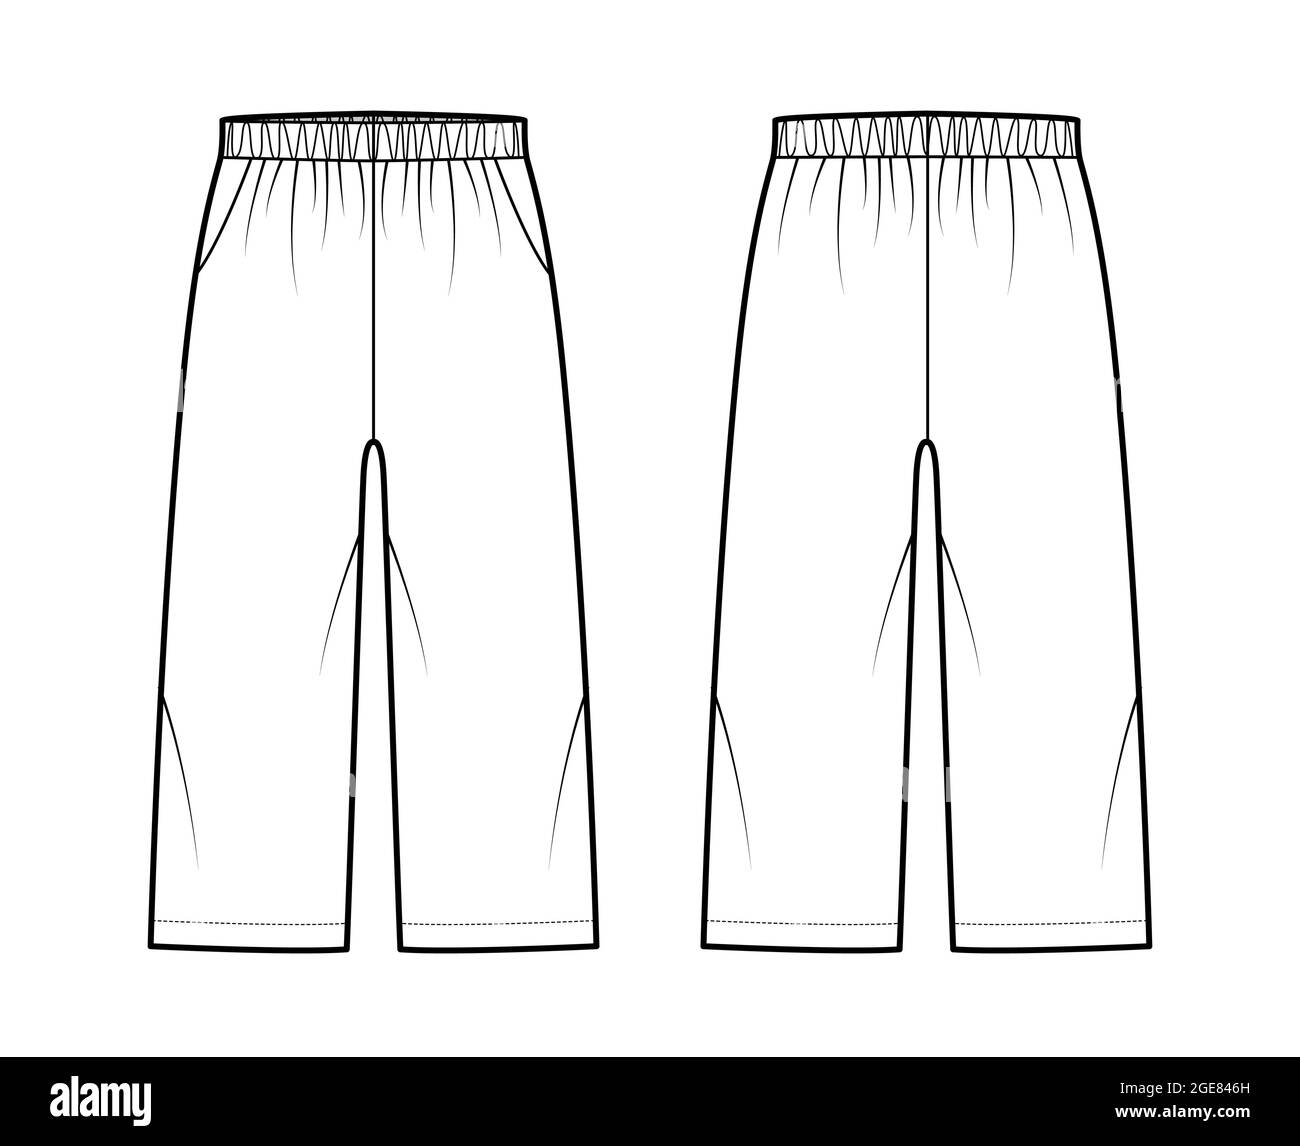 Bermuda shorts Activewear technical fashion illustration with low waist ...